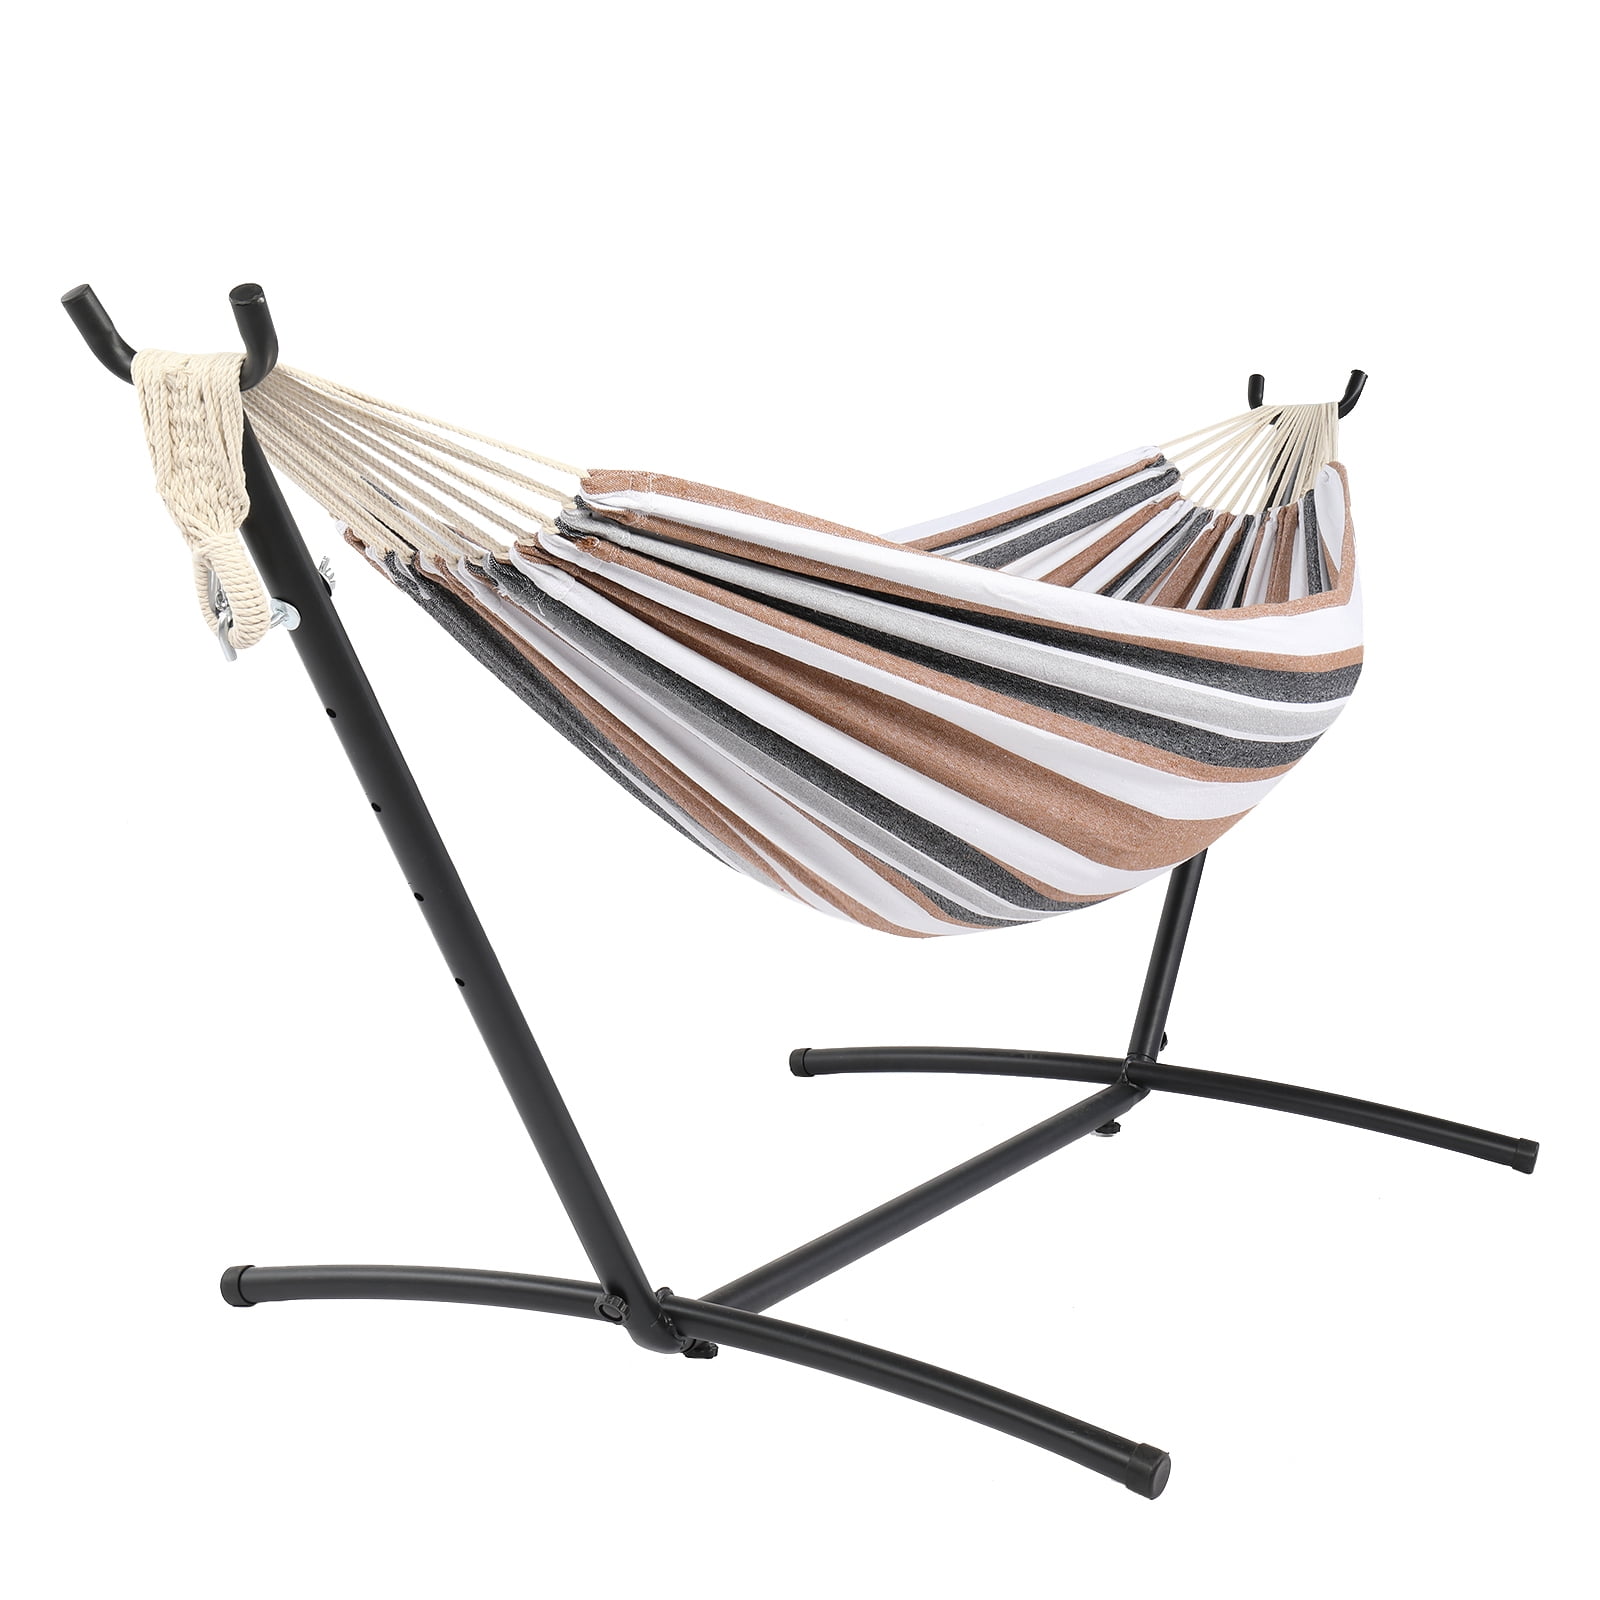 9FT Hammock with Stand Included for Indoor and Outdoor Hammock with Stand 2 Person Portable Hammock with Stand and Carry Case Rainbow VALLEYRAY Hammock with Stand 